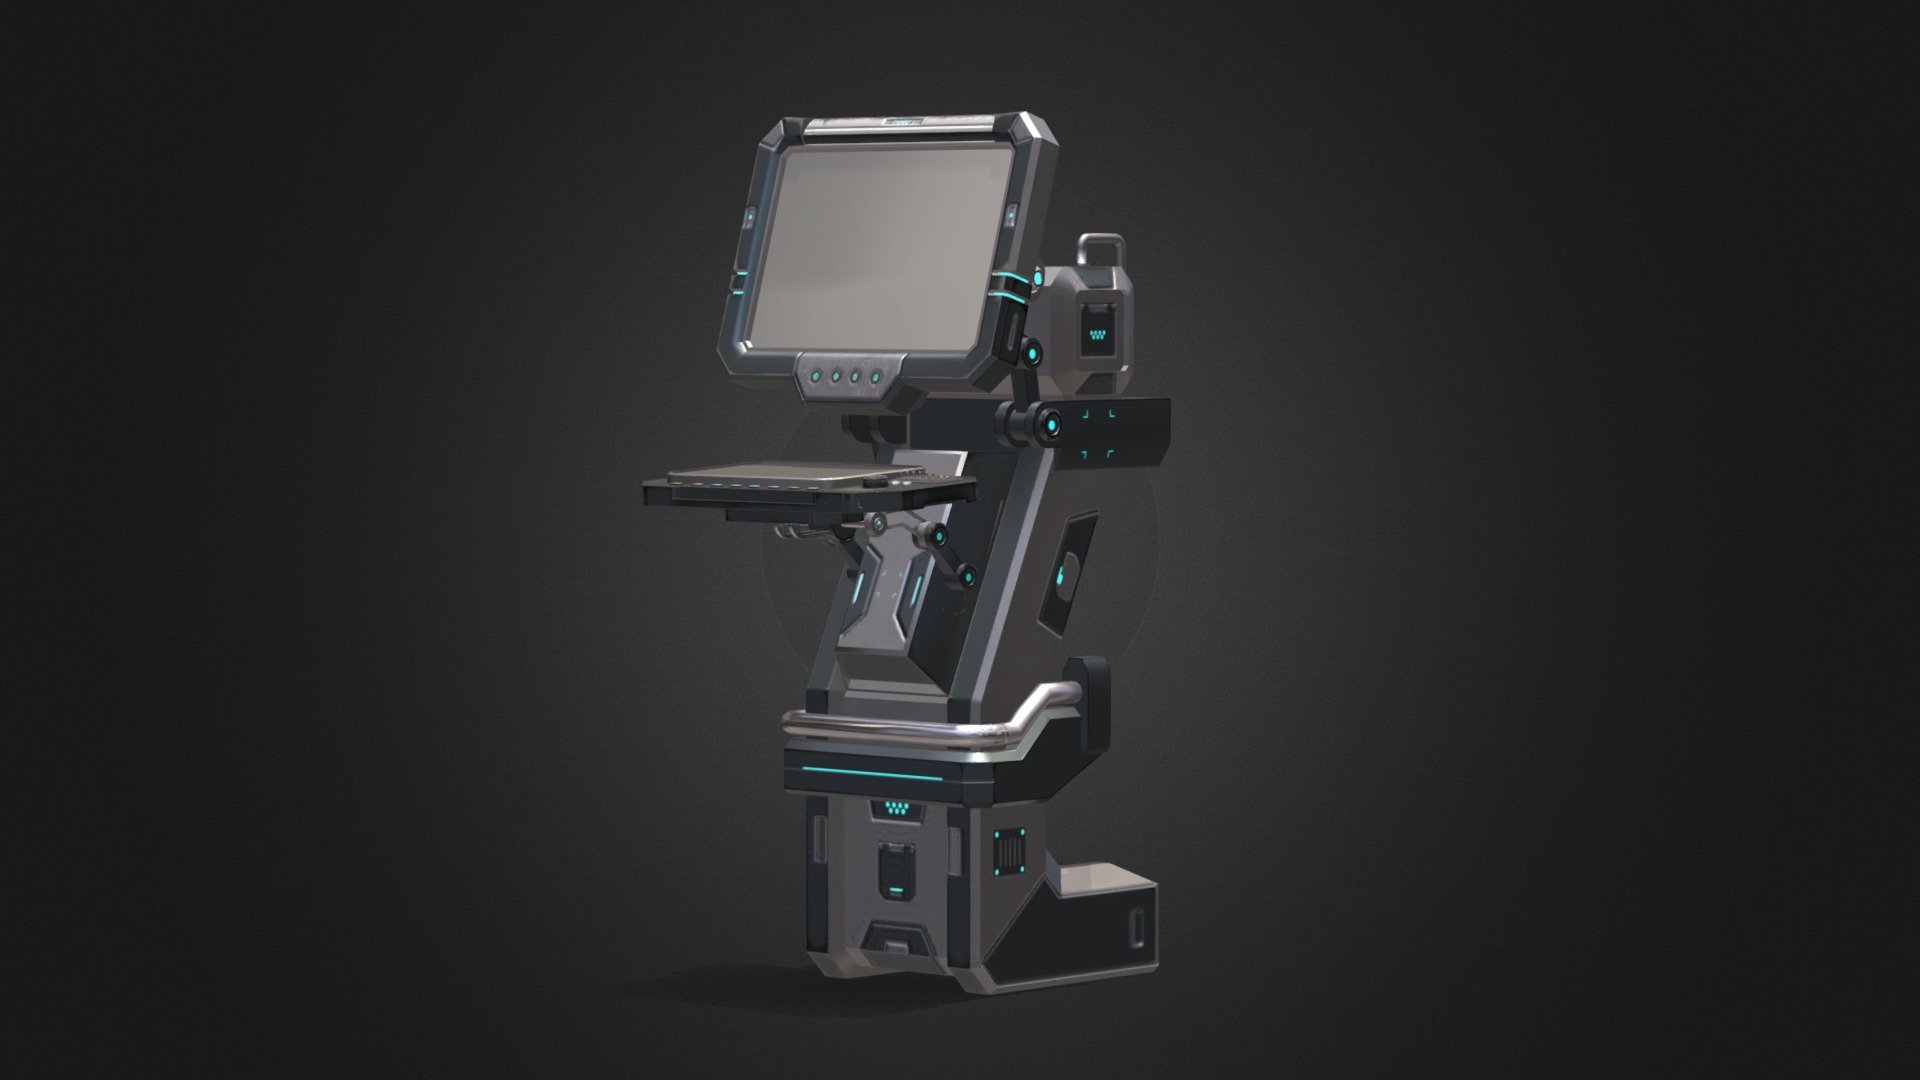 Sci-Fi Terminal with my textures and upgrades.
Based from 3D-model https://sketchfab.com/3d-models/low-poly-sci-fi-terminal-be532da6cb7a4f36948056b828bb2488 (by Steven Miles)
Absolutely free. Your like or comment is my reward :) - Sci-Fi Terminal - Download Free 3D model by Bogdan Kuznetsov (@kuznetsov_bogdan) 3d model